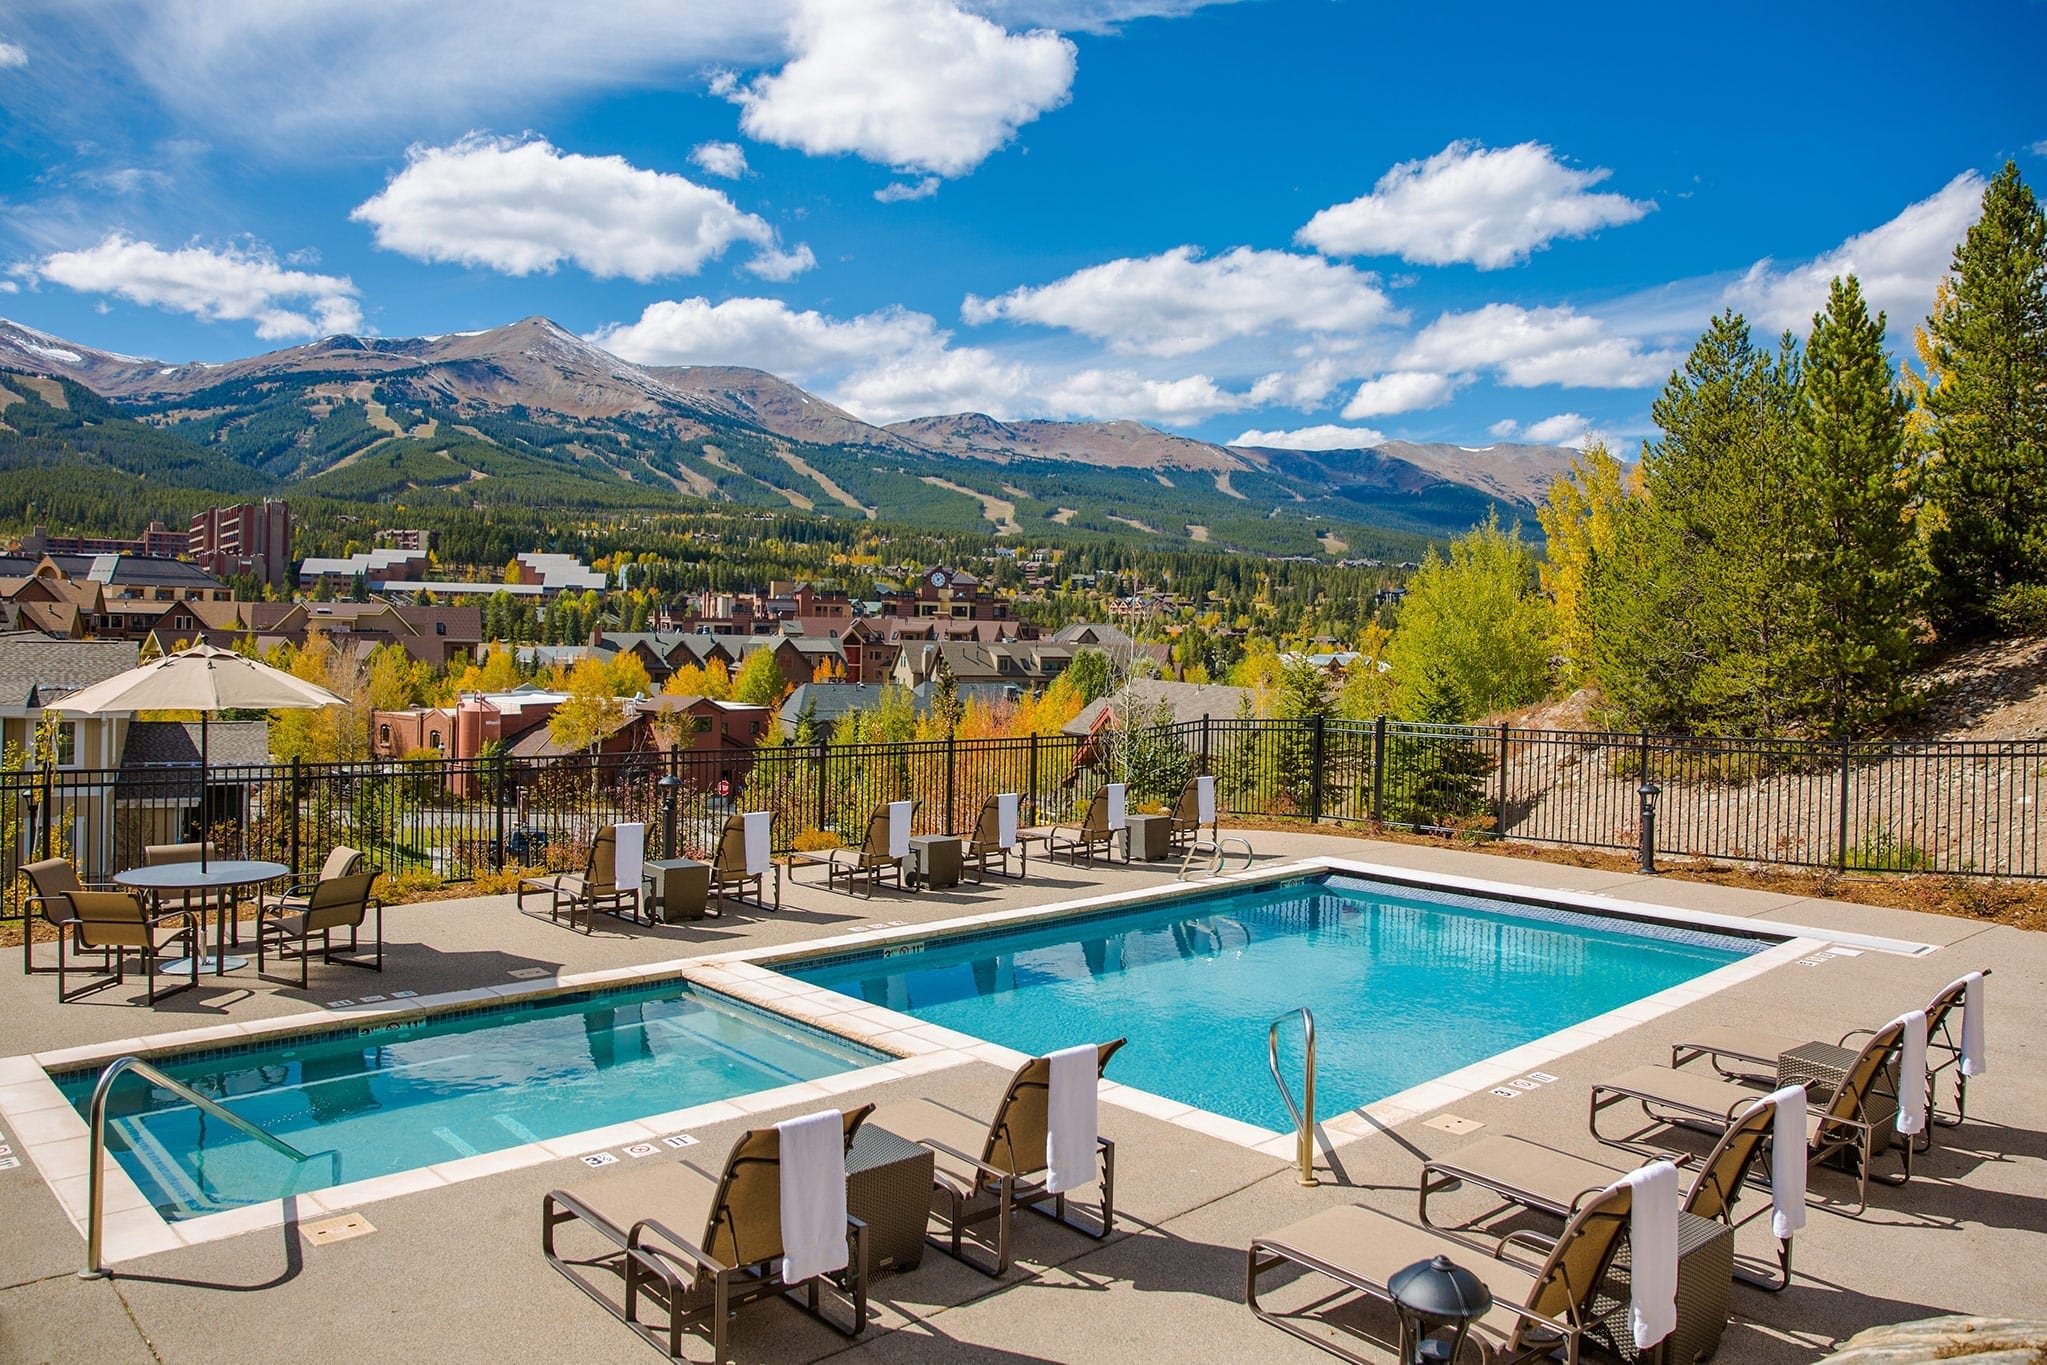 The Residence Inn pool area with one of the best views of any pool in Breckenridge.